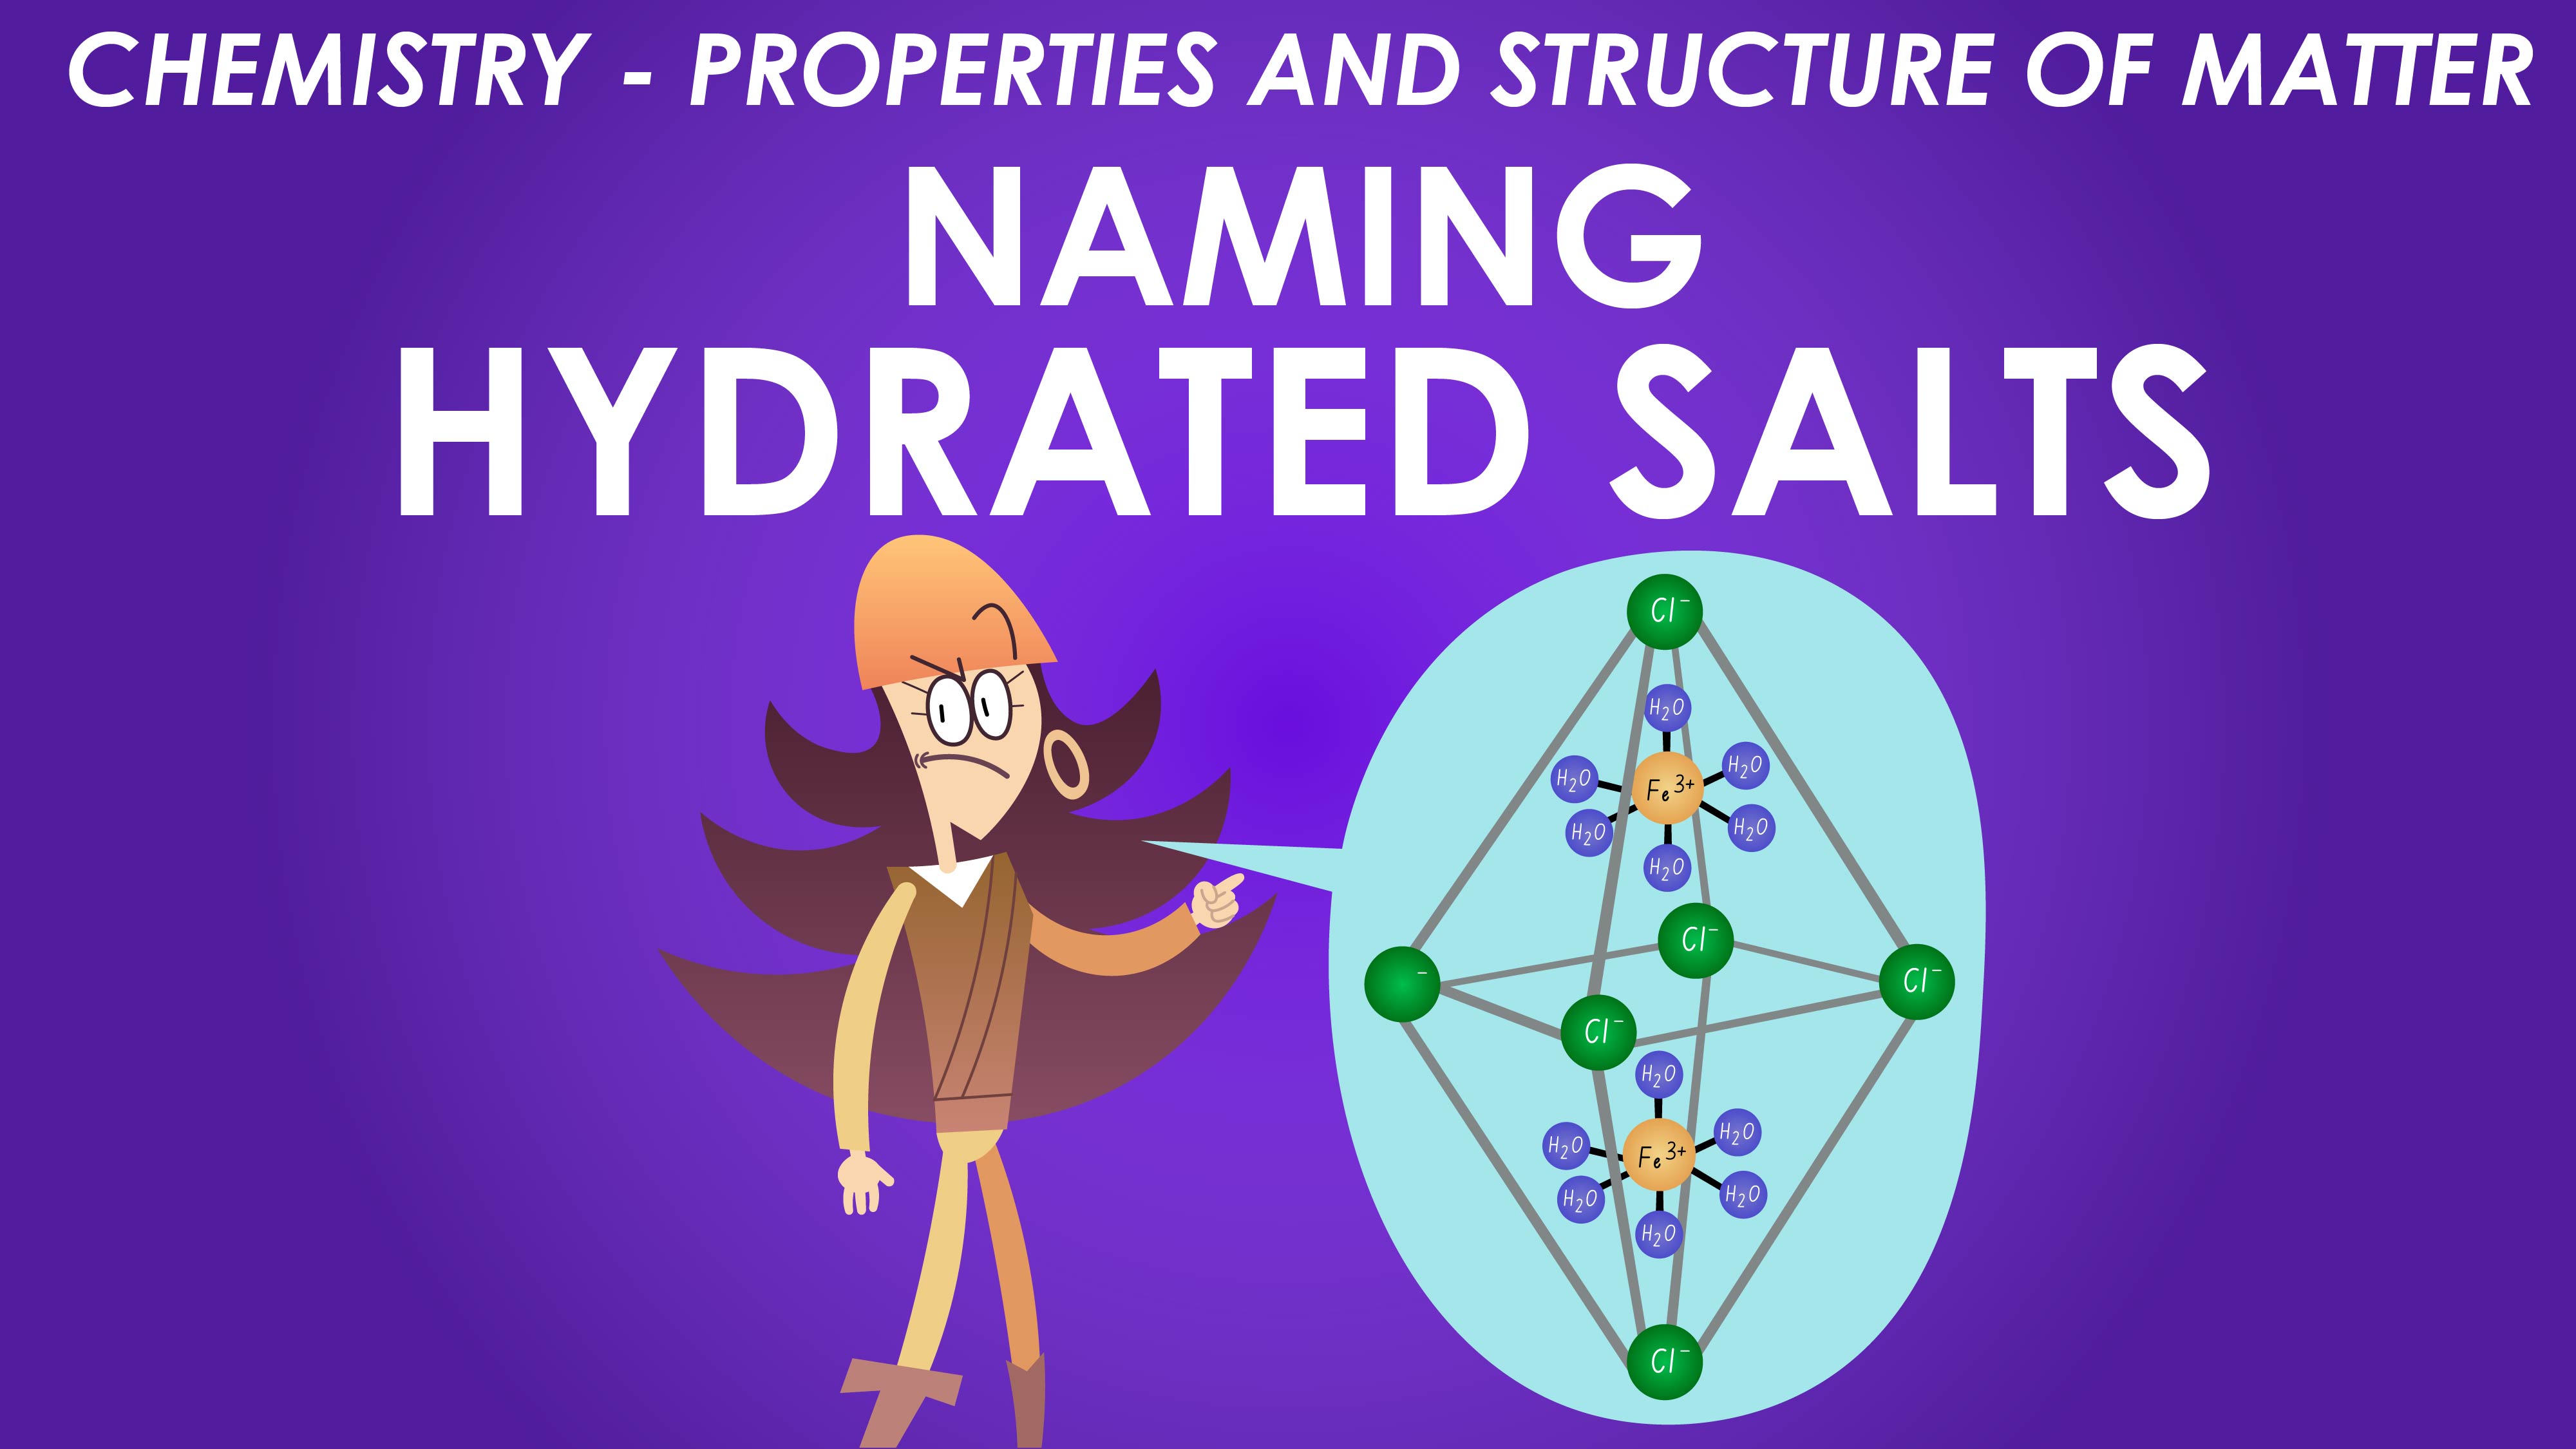 Naming Hydrated Salts - Properties of Matter